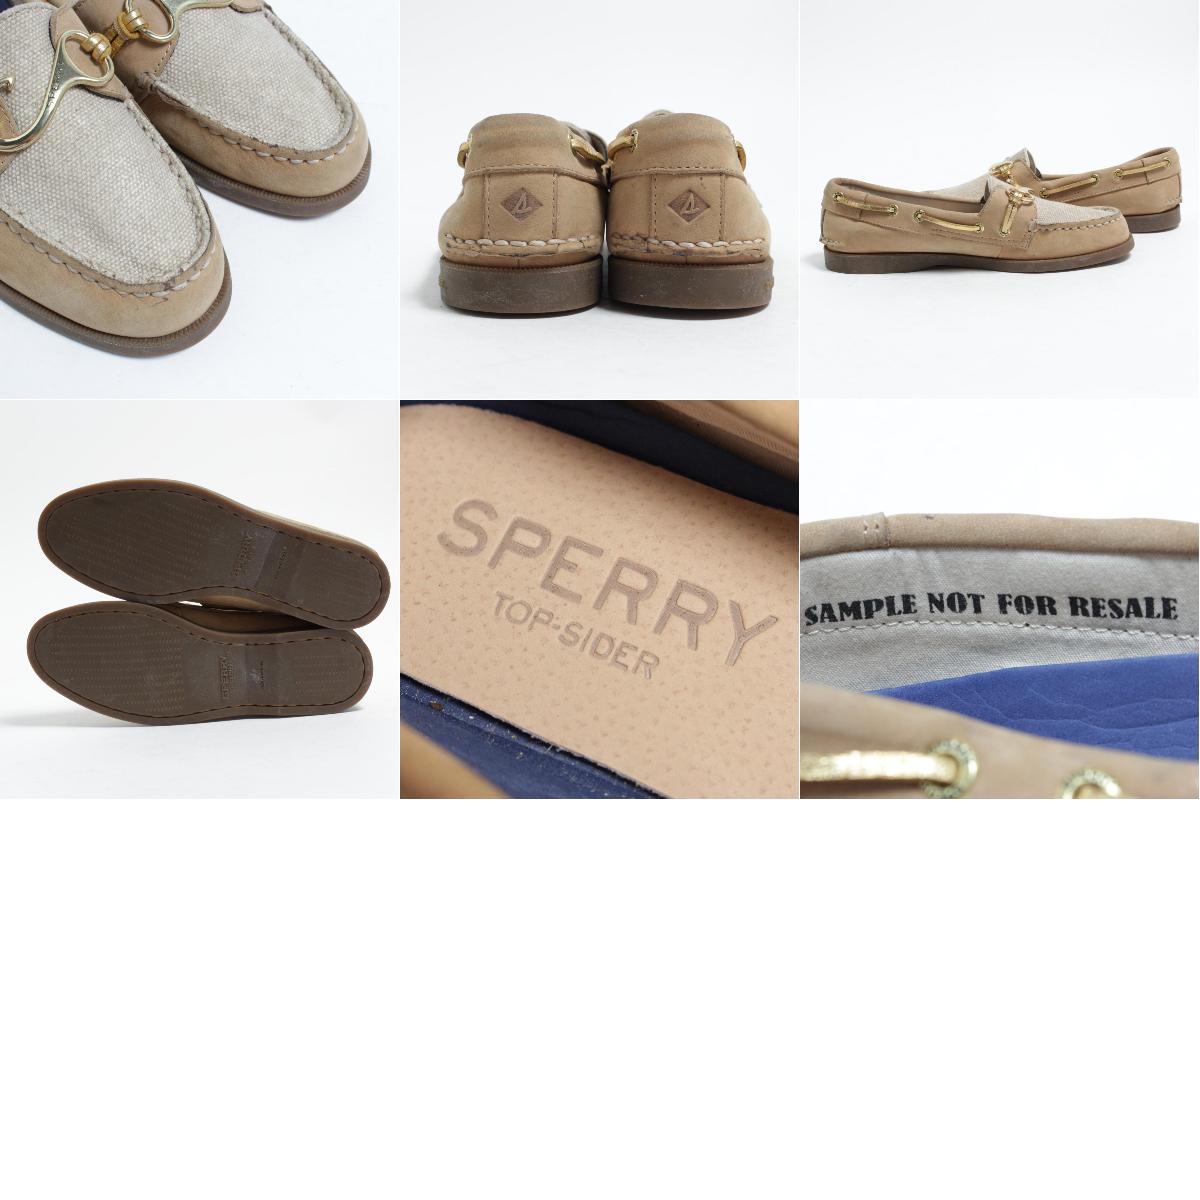 sperry top sider deck shoes